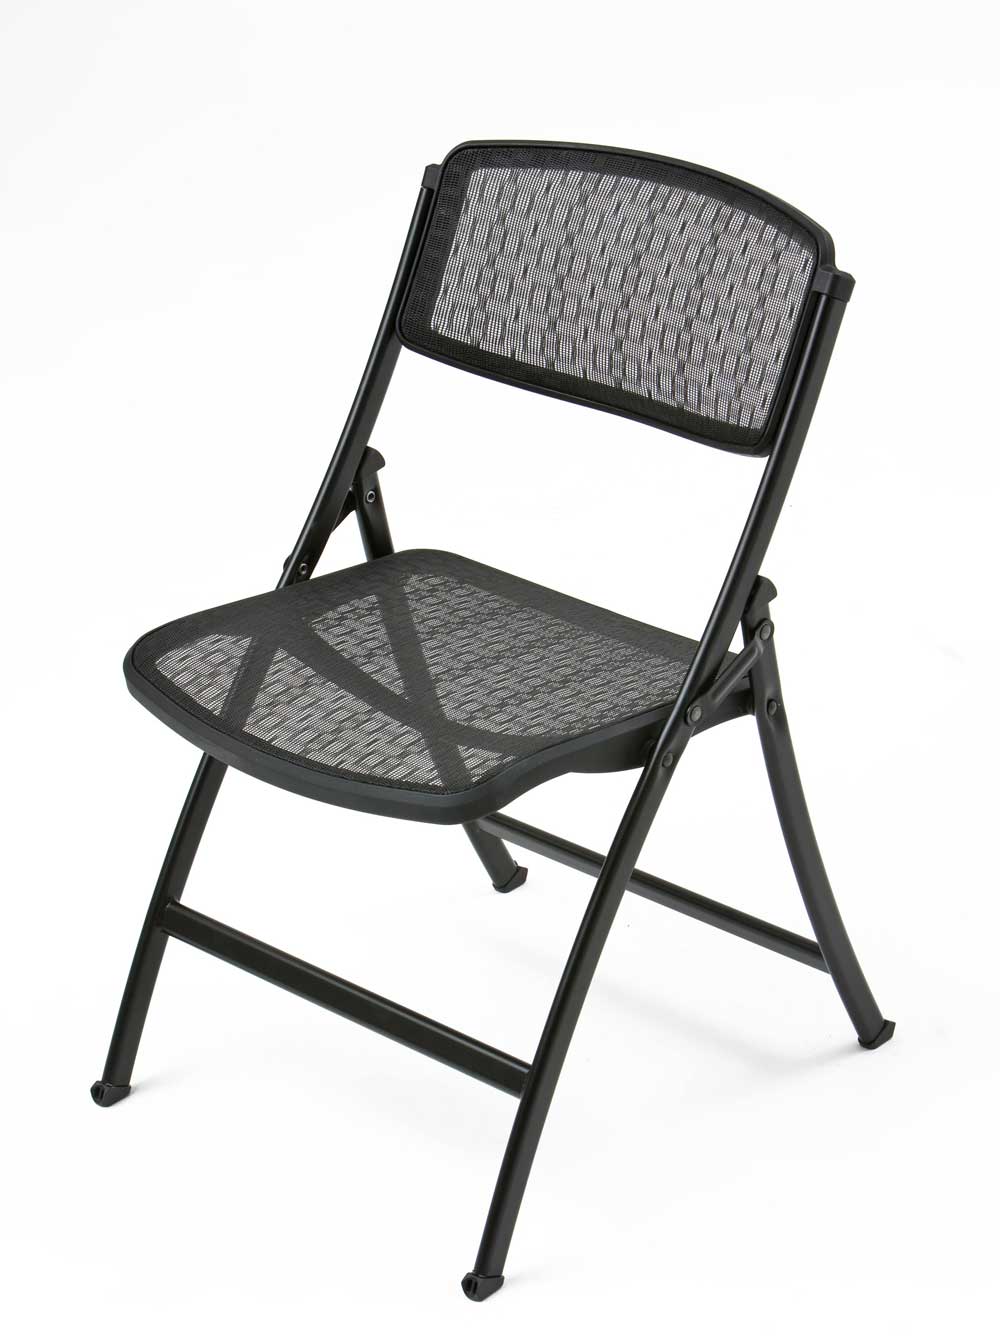 Lightweight Folding Chairs for Extra Pleasure